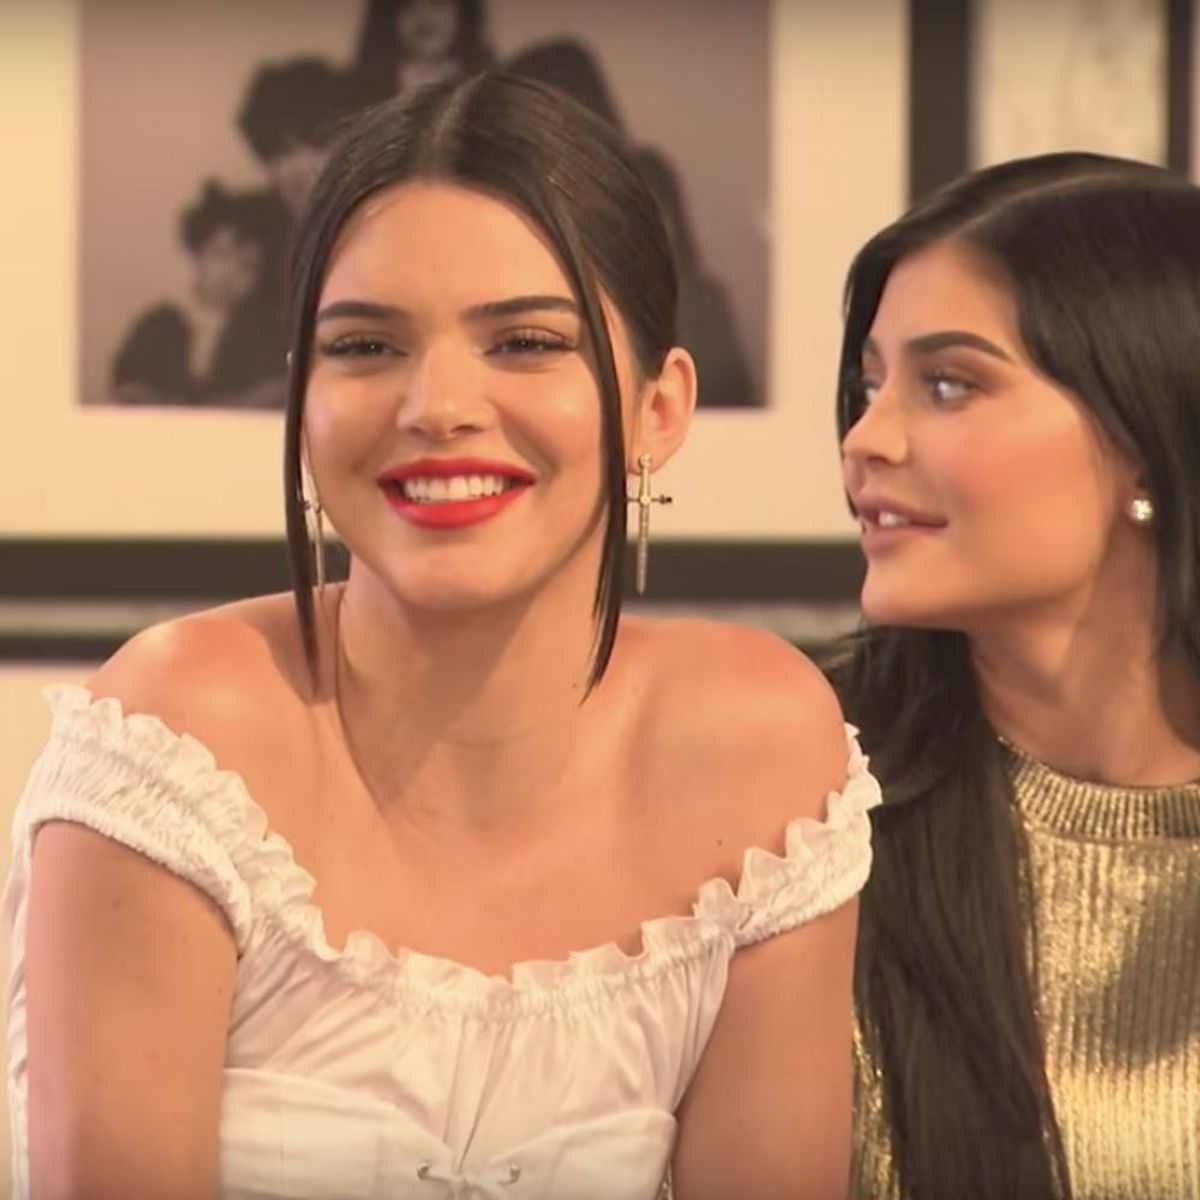 The Kardashians Respond to the Most Scandalous Rumors About Themselves